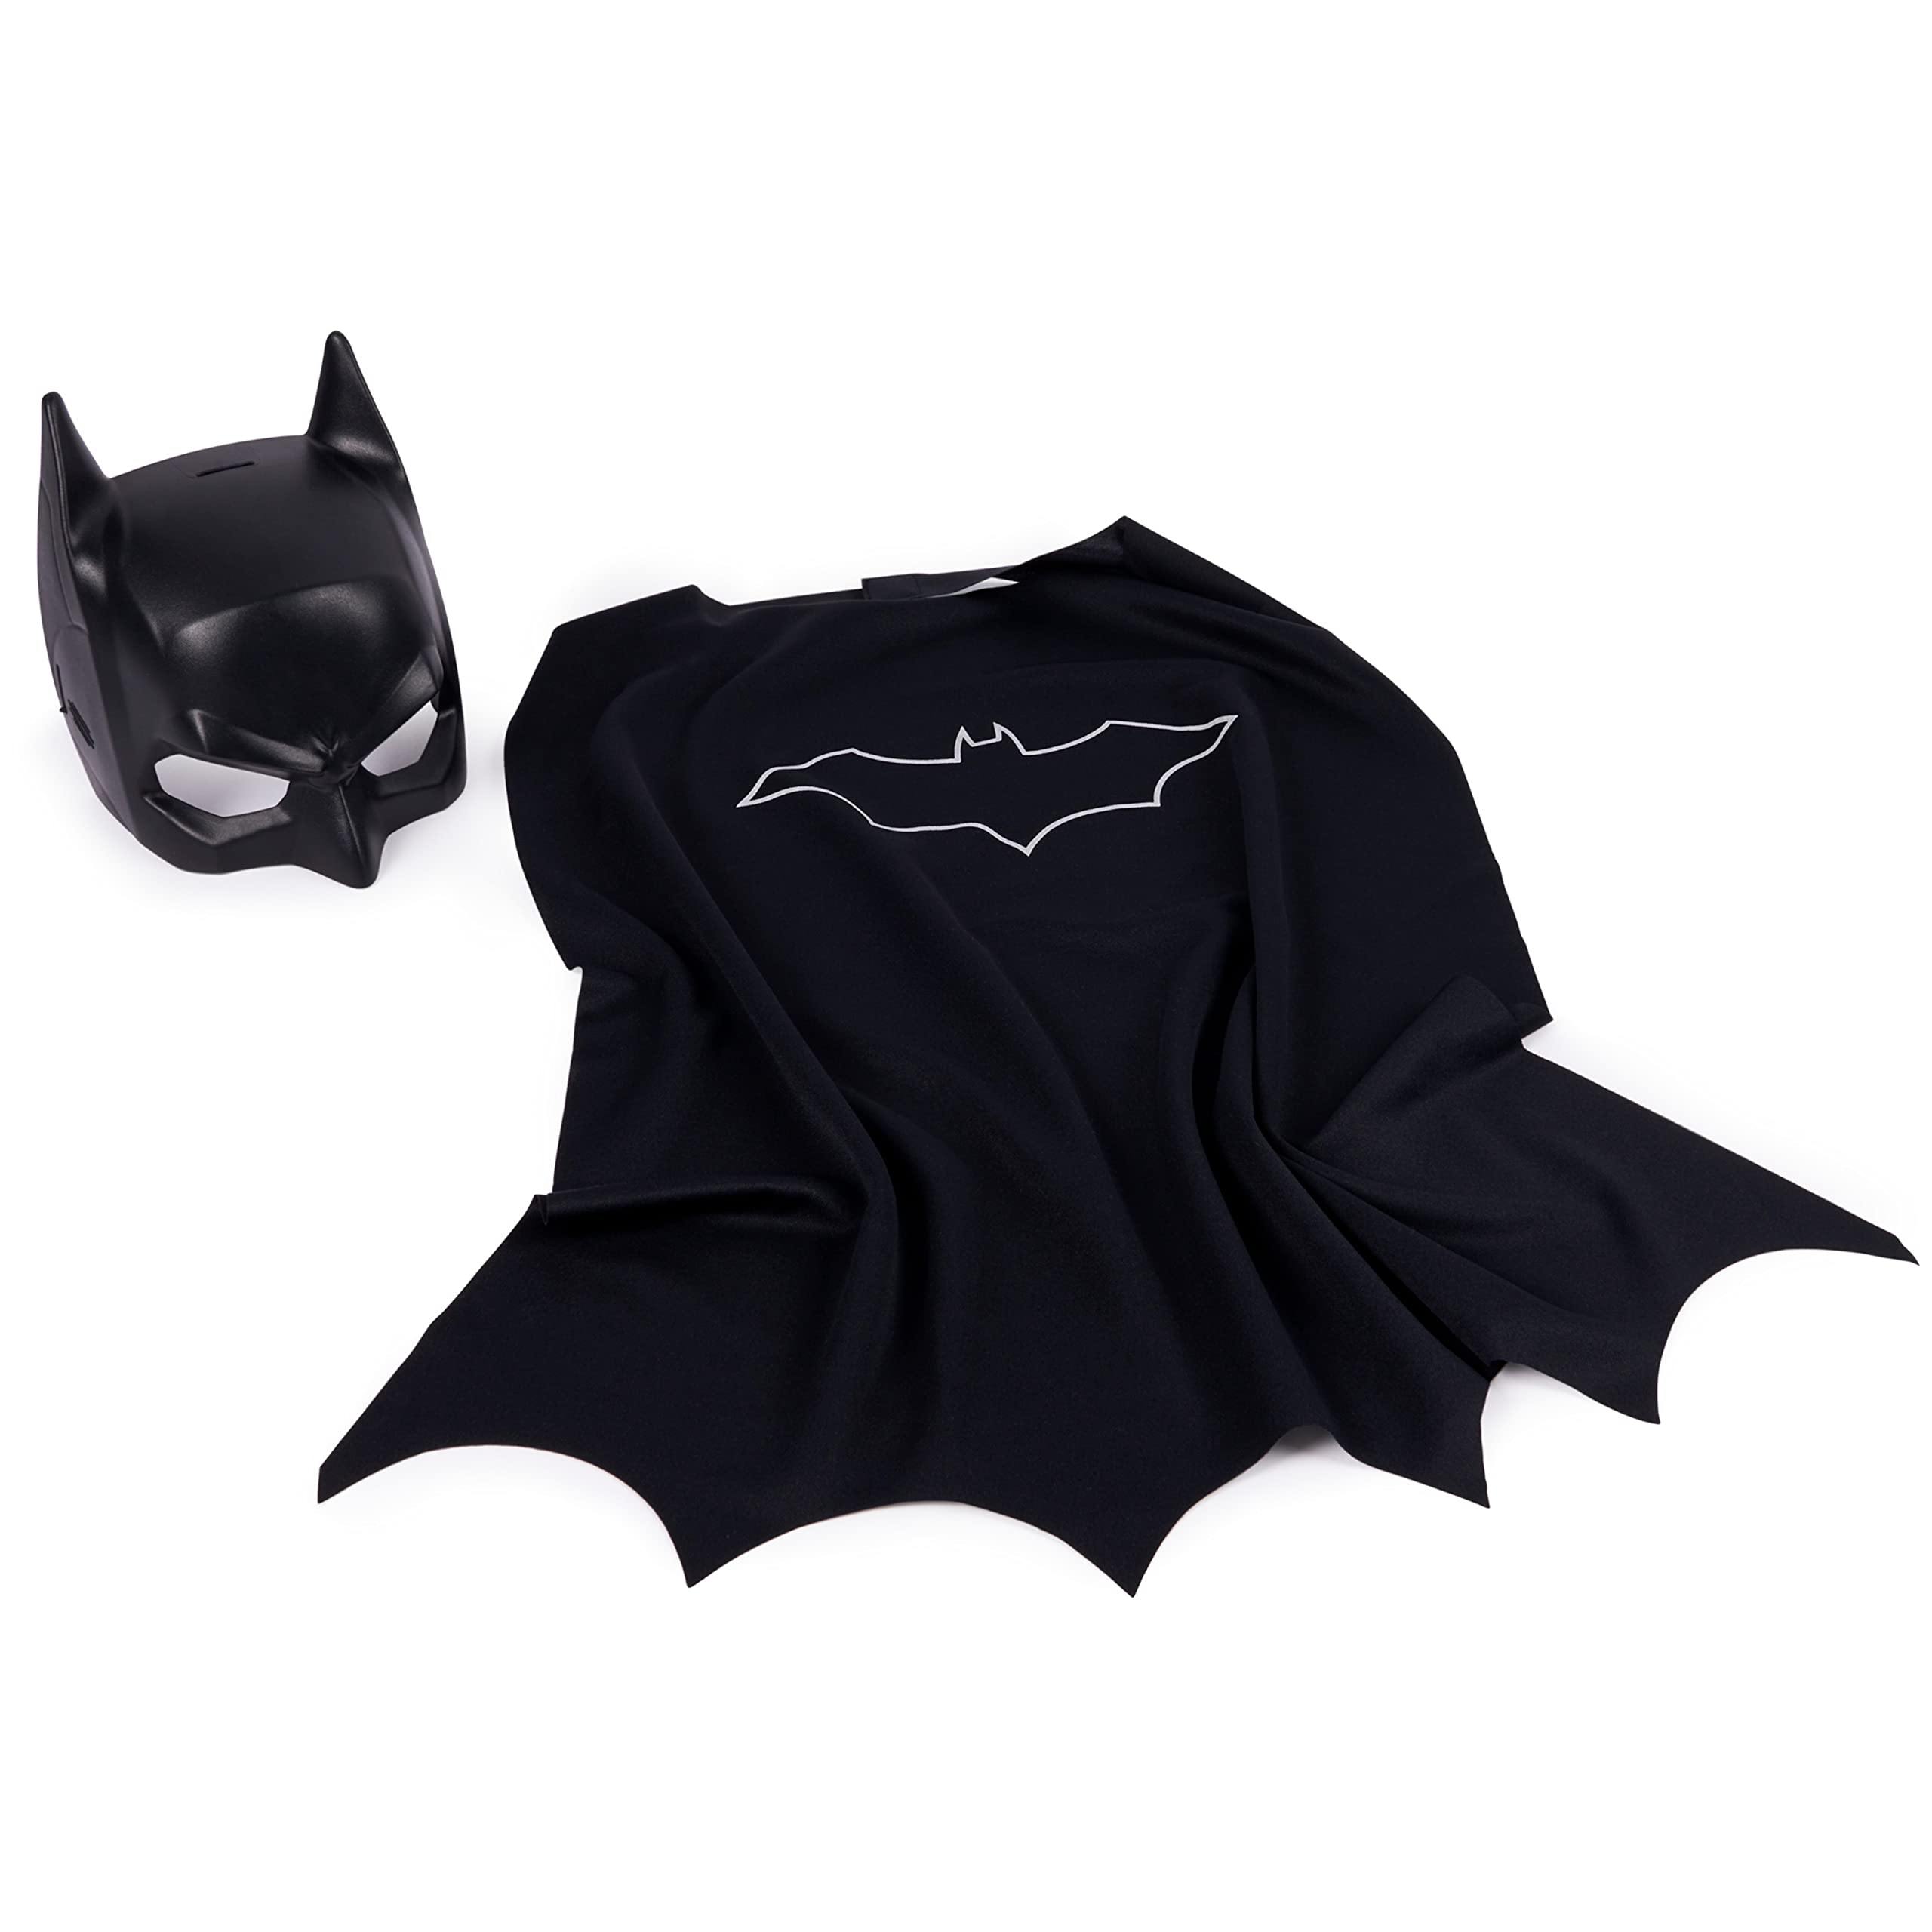 BATMAN DC Comics, Cape and Mask Set, Super Hero Costume Accessories, Kids Roleplay for Boys and Girls Ages 3+